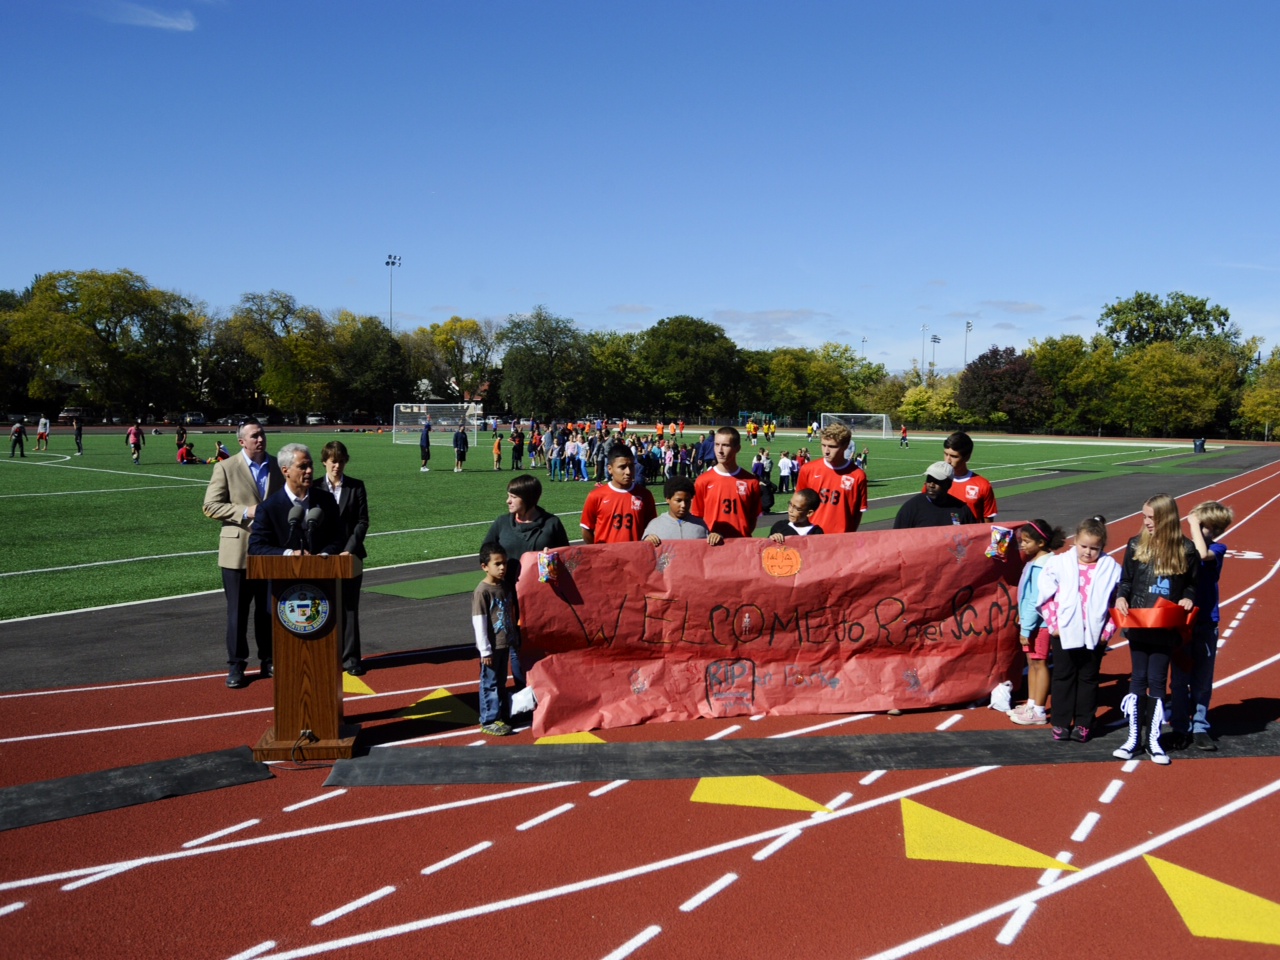 Mayor Rahm Emanuel, Alderman Deborah Mell (33rd Ward) and members of the Lincoln Square community gathered today at the site of a new artificial turf field and running track at River Park to highlight on going investments being made in the Lincoln Square community.